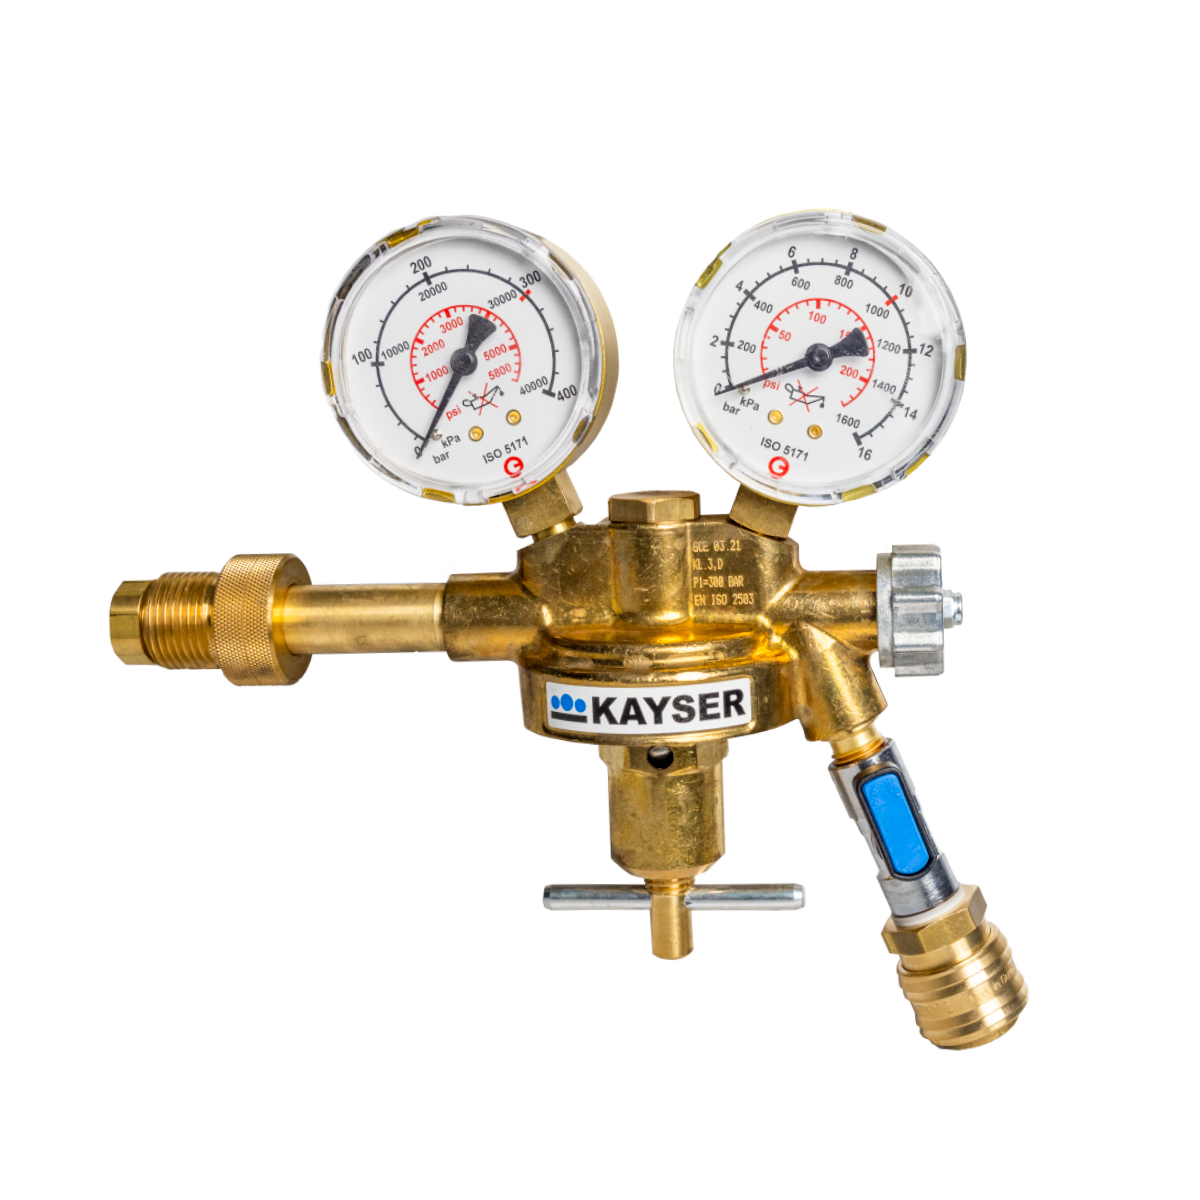 Pressure reducer G5/8 300 bar - 0-10 bar with NW 7.2 connection and ball valve